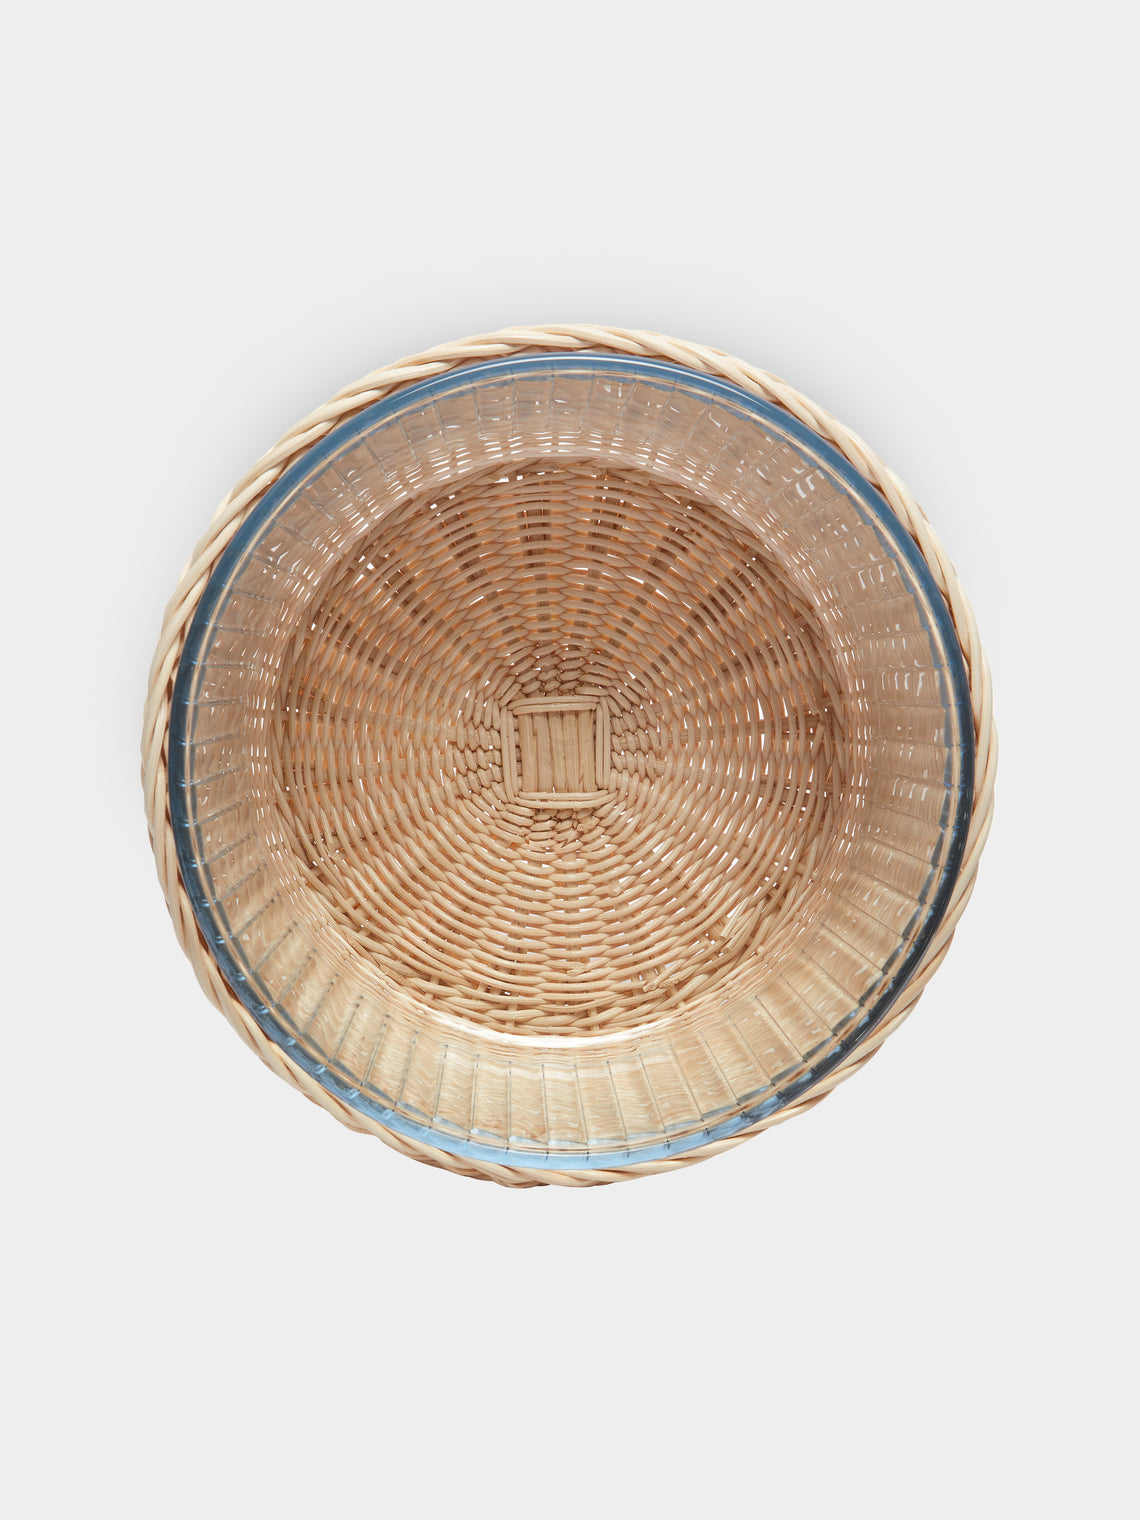 Mila Maurizi - Glicine Handwoven Wicker and Glass Serving Bowl -  - ABASK